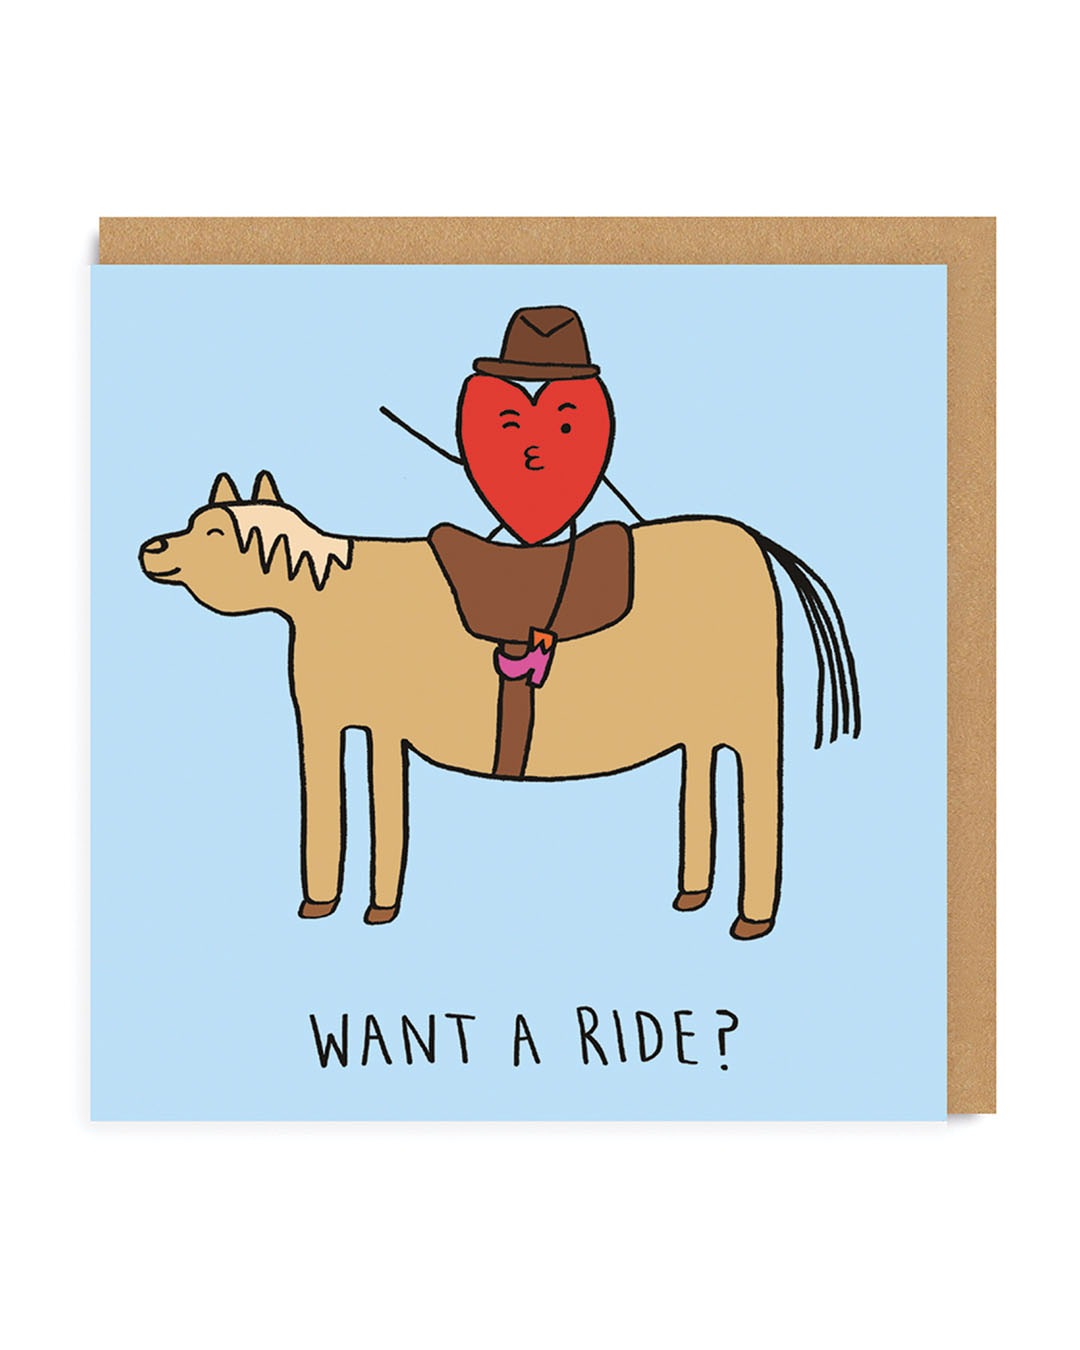 Valentine’s Day | Rude Valentines Card For Him or Her | Want a ride? Valentine’s Day Card | Ohh Deer Unique Valentine’s Card | Artwork by Sophie Hamlin | Made In The UK, Eco-Friendly Materials, Plastic Free Packaging